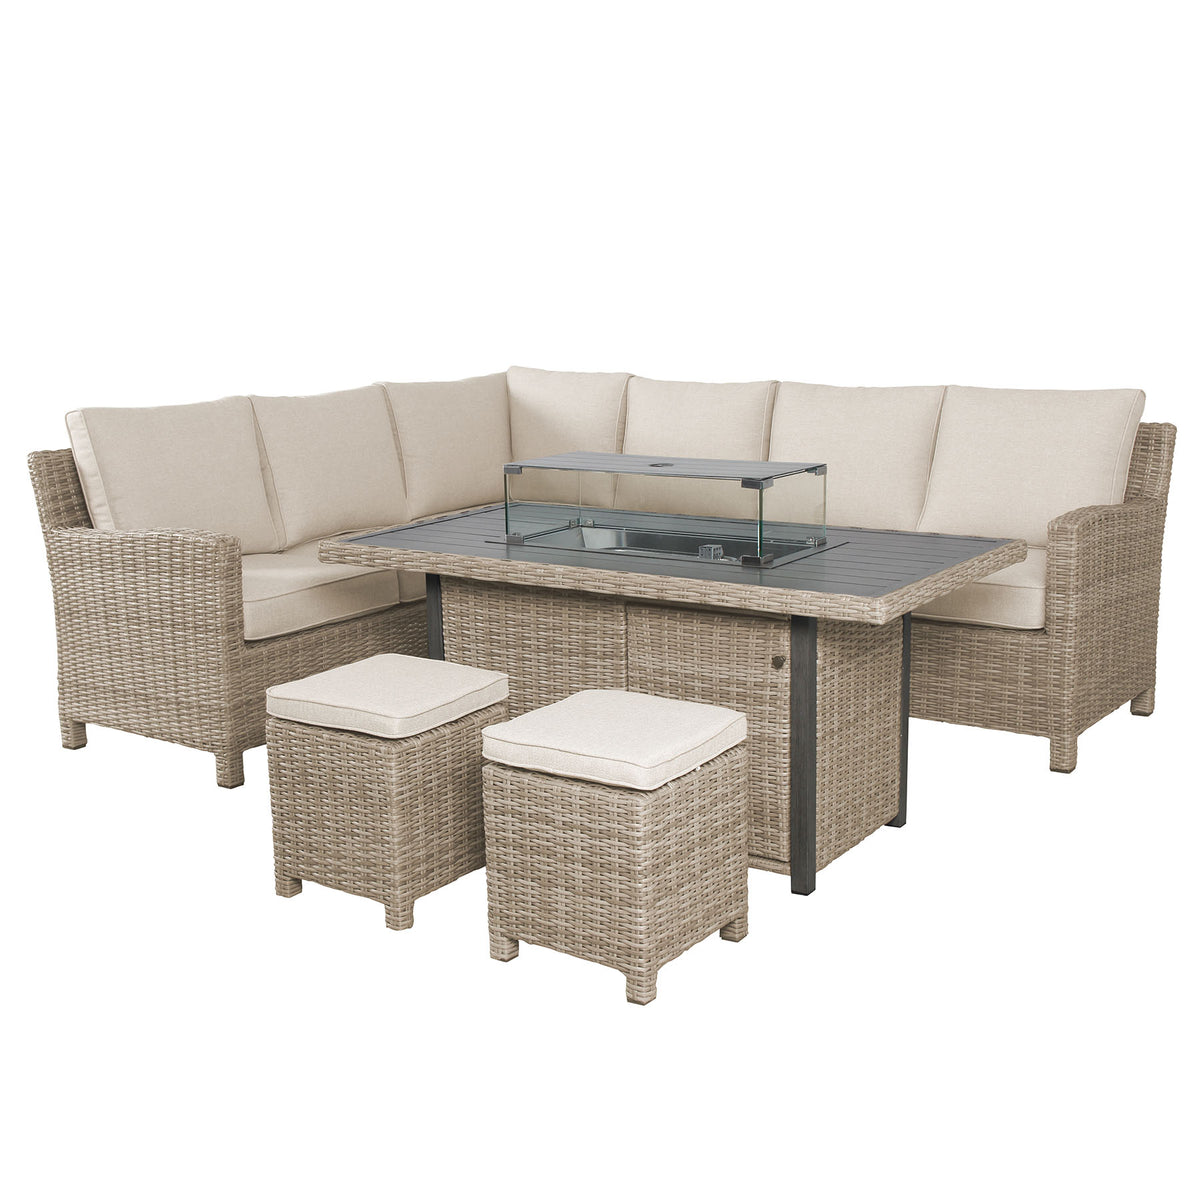 Kettler Palma Corner Right Hand Oyster Wicker Outdoor Sofa Set with Fire Pit Table